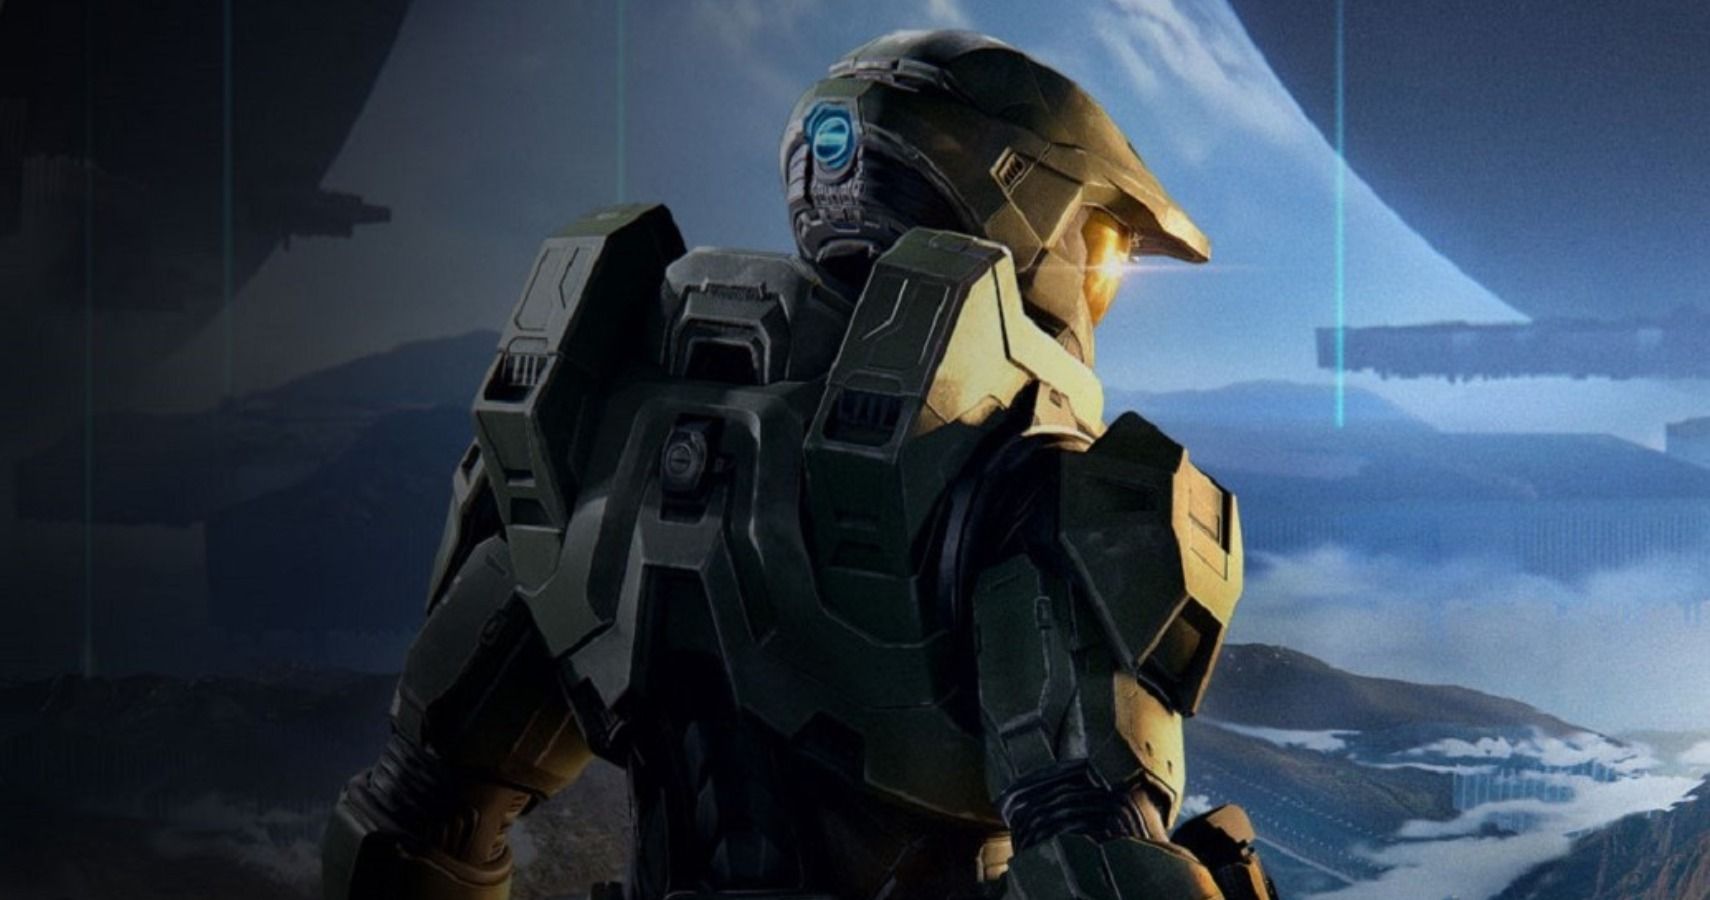 halo infinite story mode release date